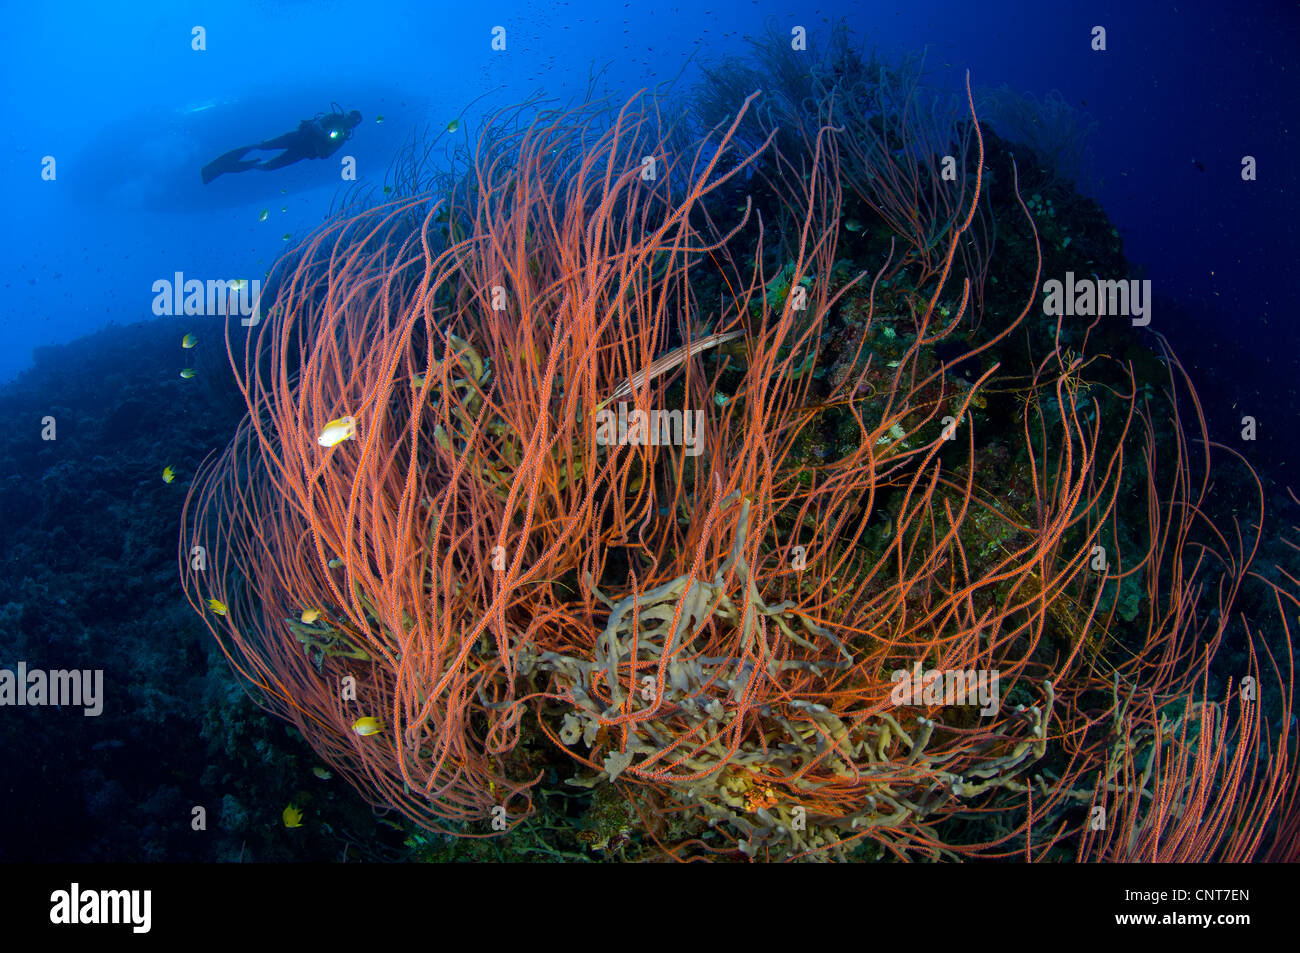 Red whip coral sea fan (Ctenocella sp.) with diver, Fathers reef, Kimbe Bay, Papua New Guinea. Stock Photo